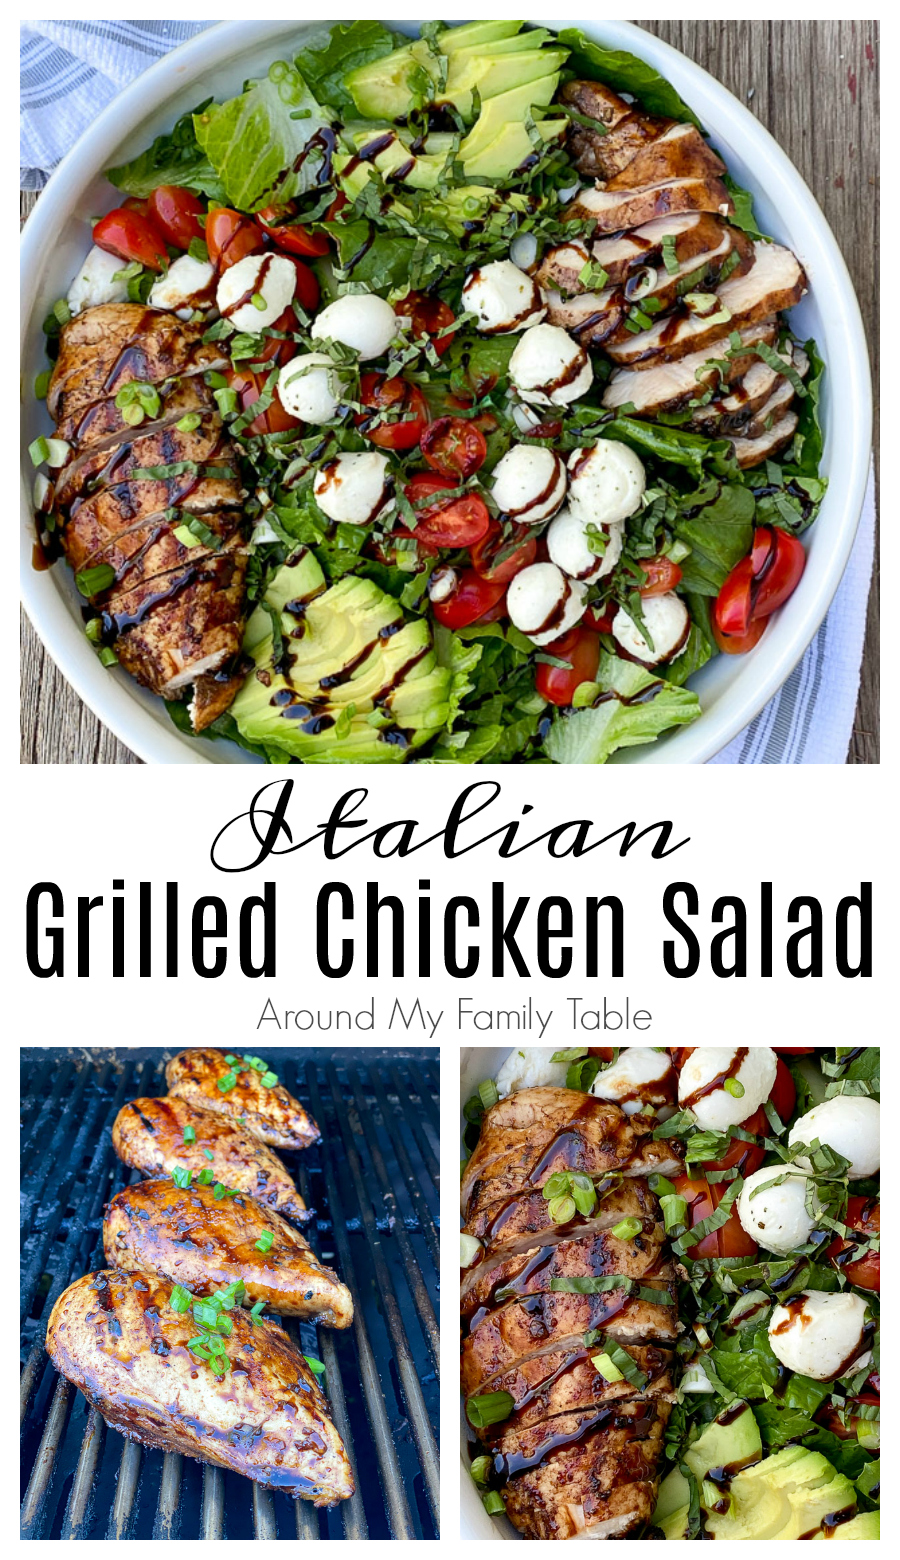 Hot summer nights call for simple dinners like this Italian Grilled Chicken Salad.  It's easy to throw together and has so much flavor from the chicken, mozzarella, and balsamic glaze.  via @slingmama